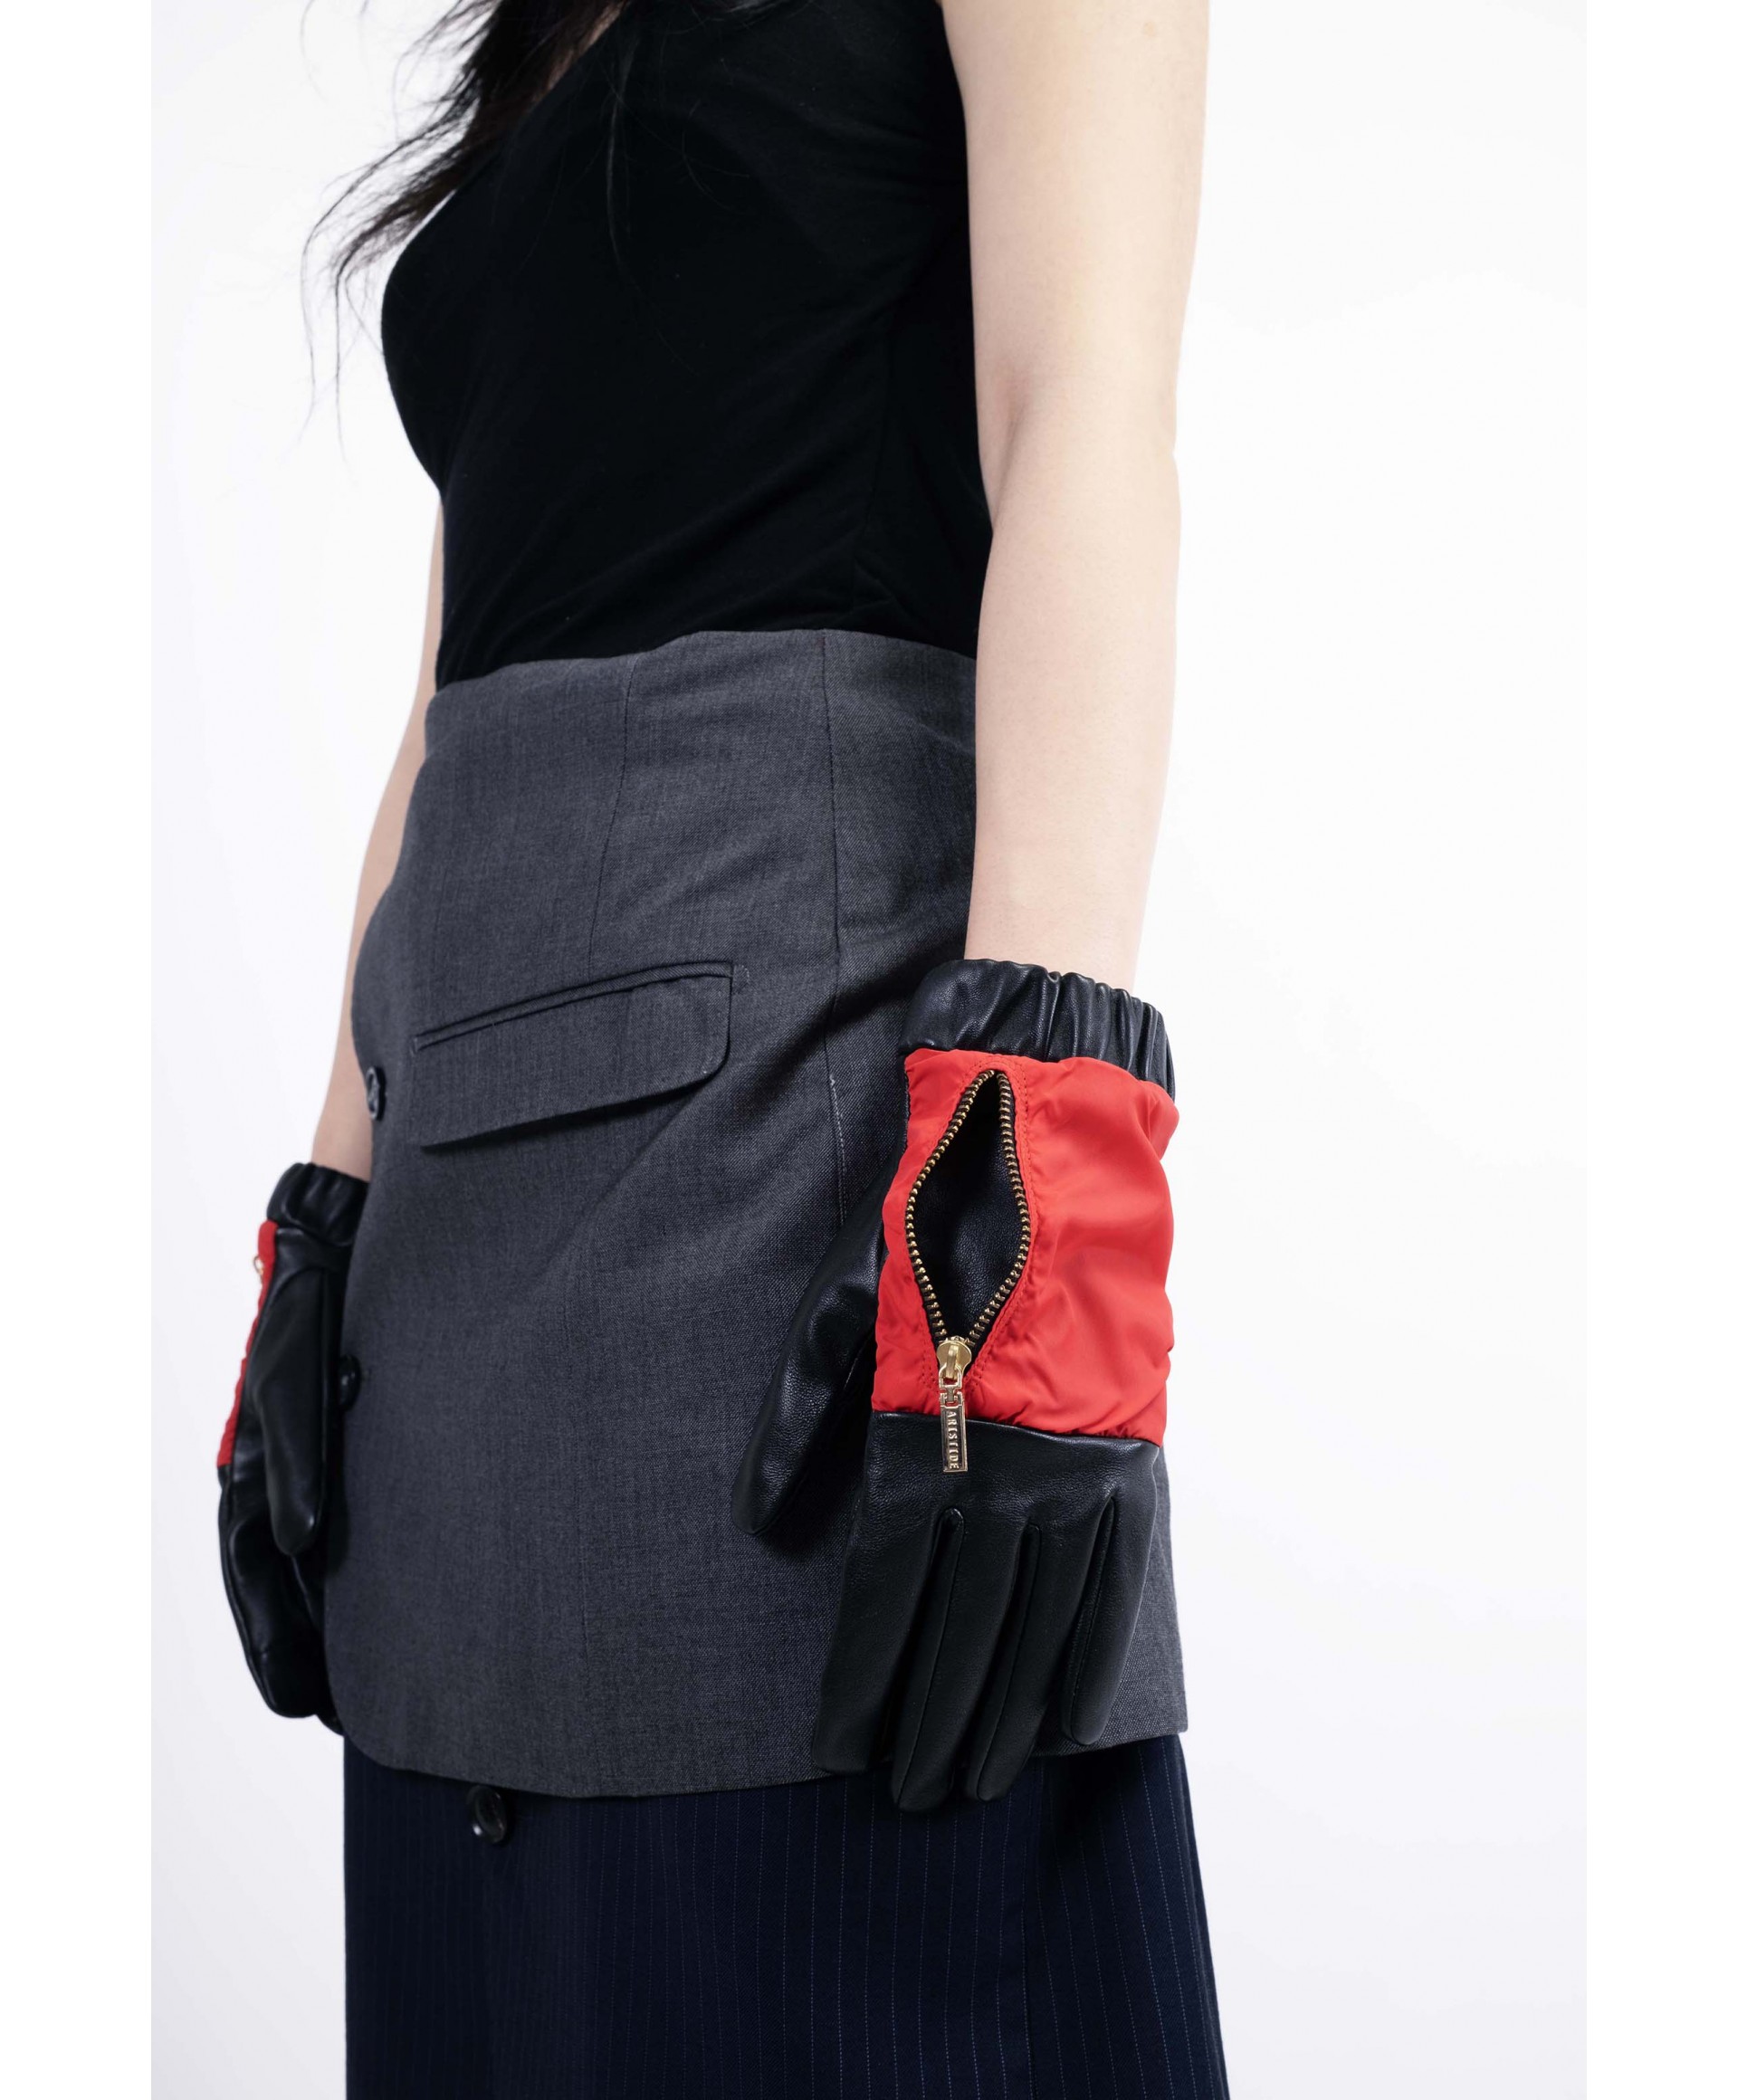 BLACK TOUCHSCREEN LEATHER GLOVES WITH A ZIPPED POCKET